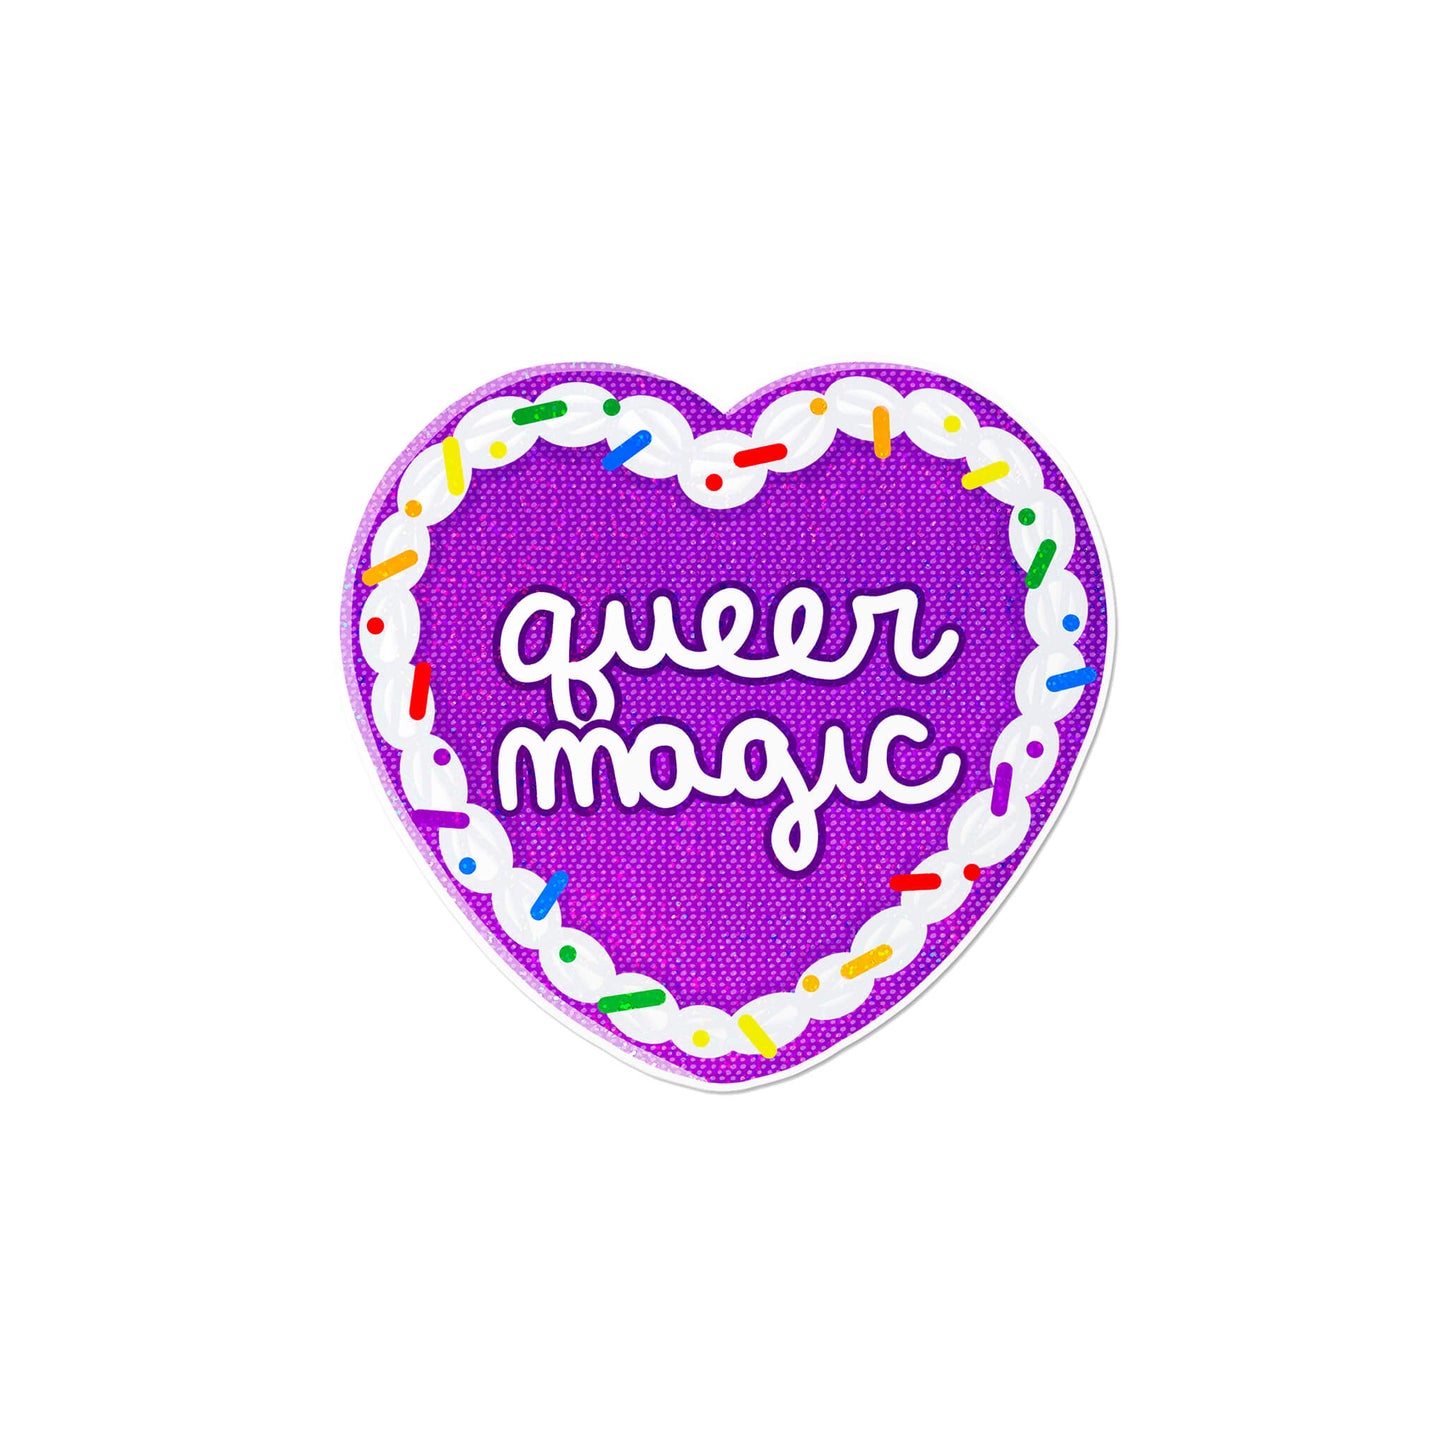 Holographic Queer Heart Cake Sticker